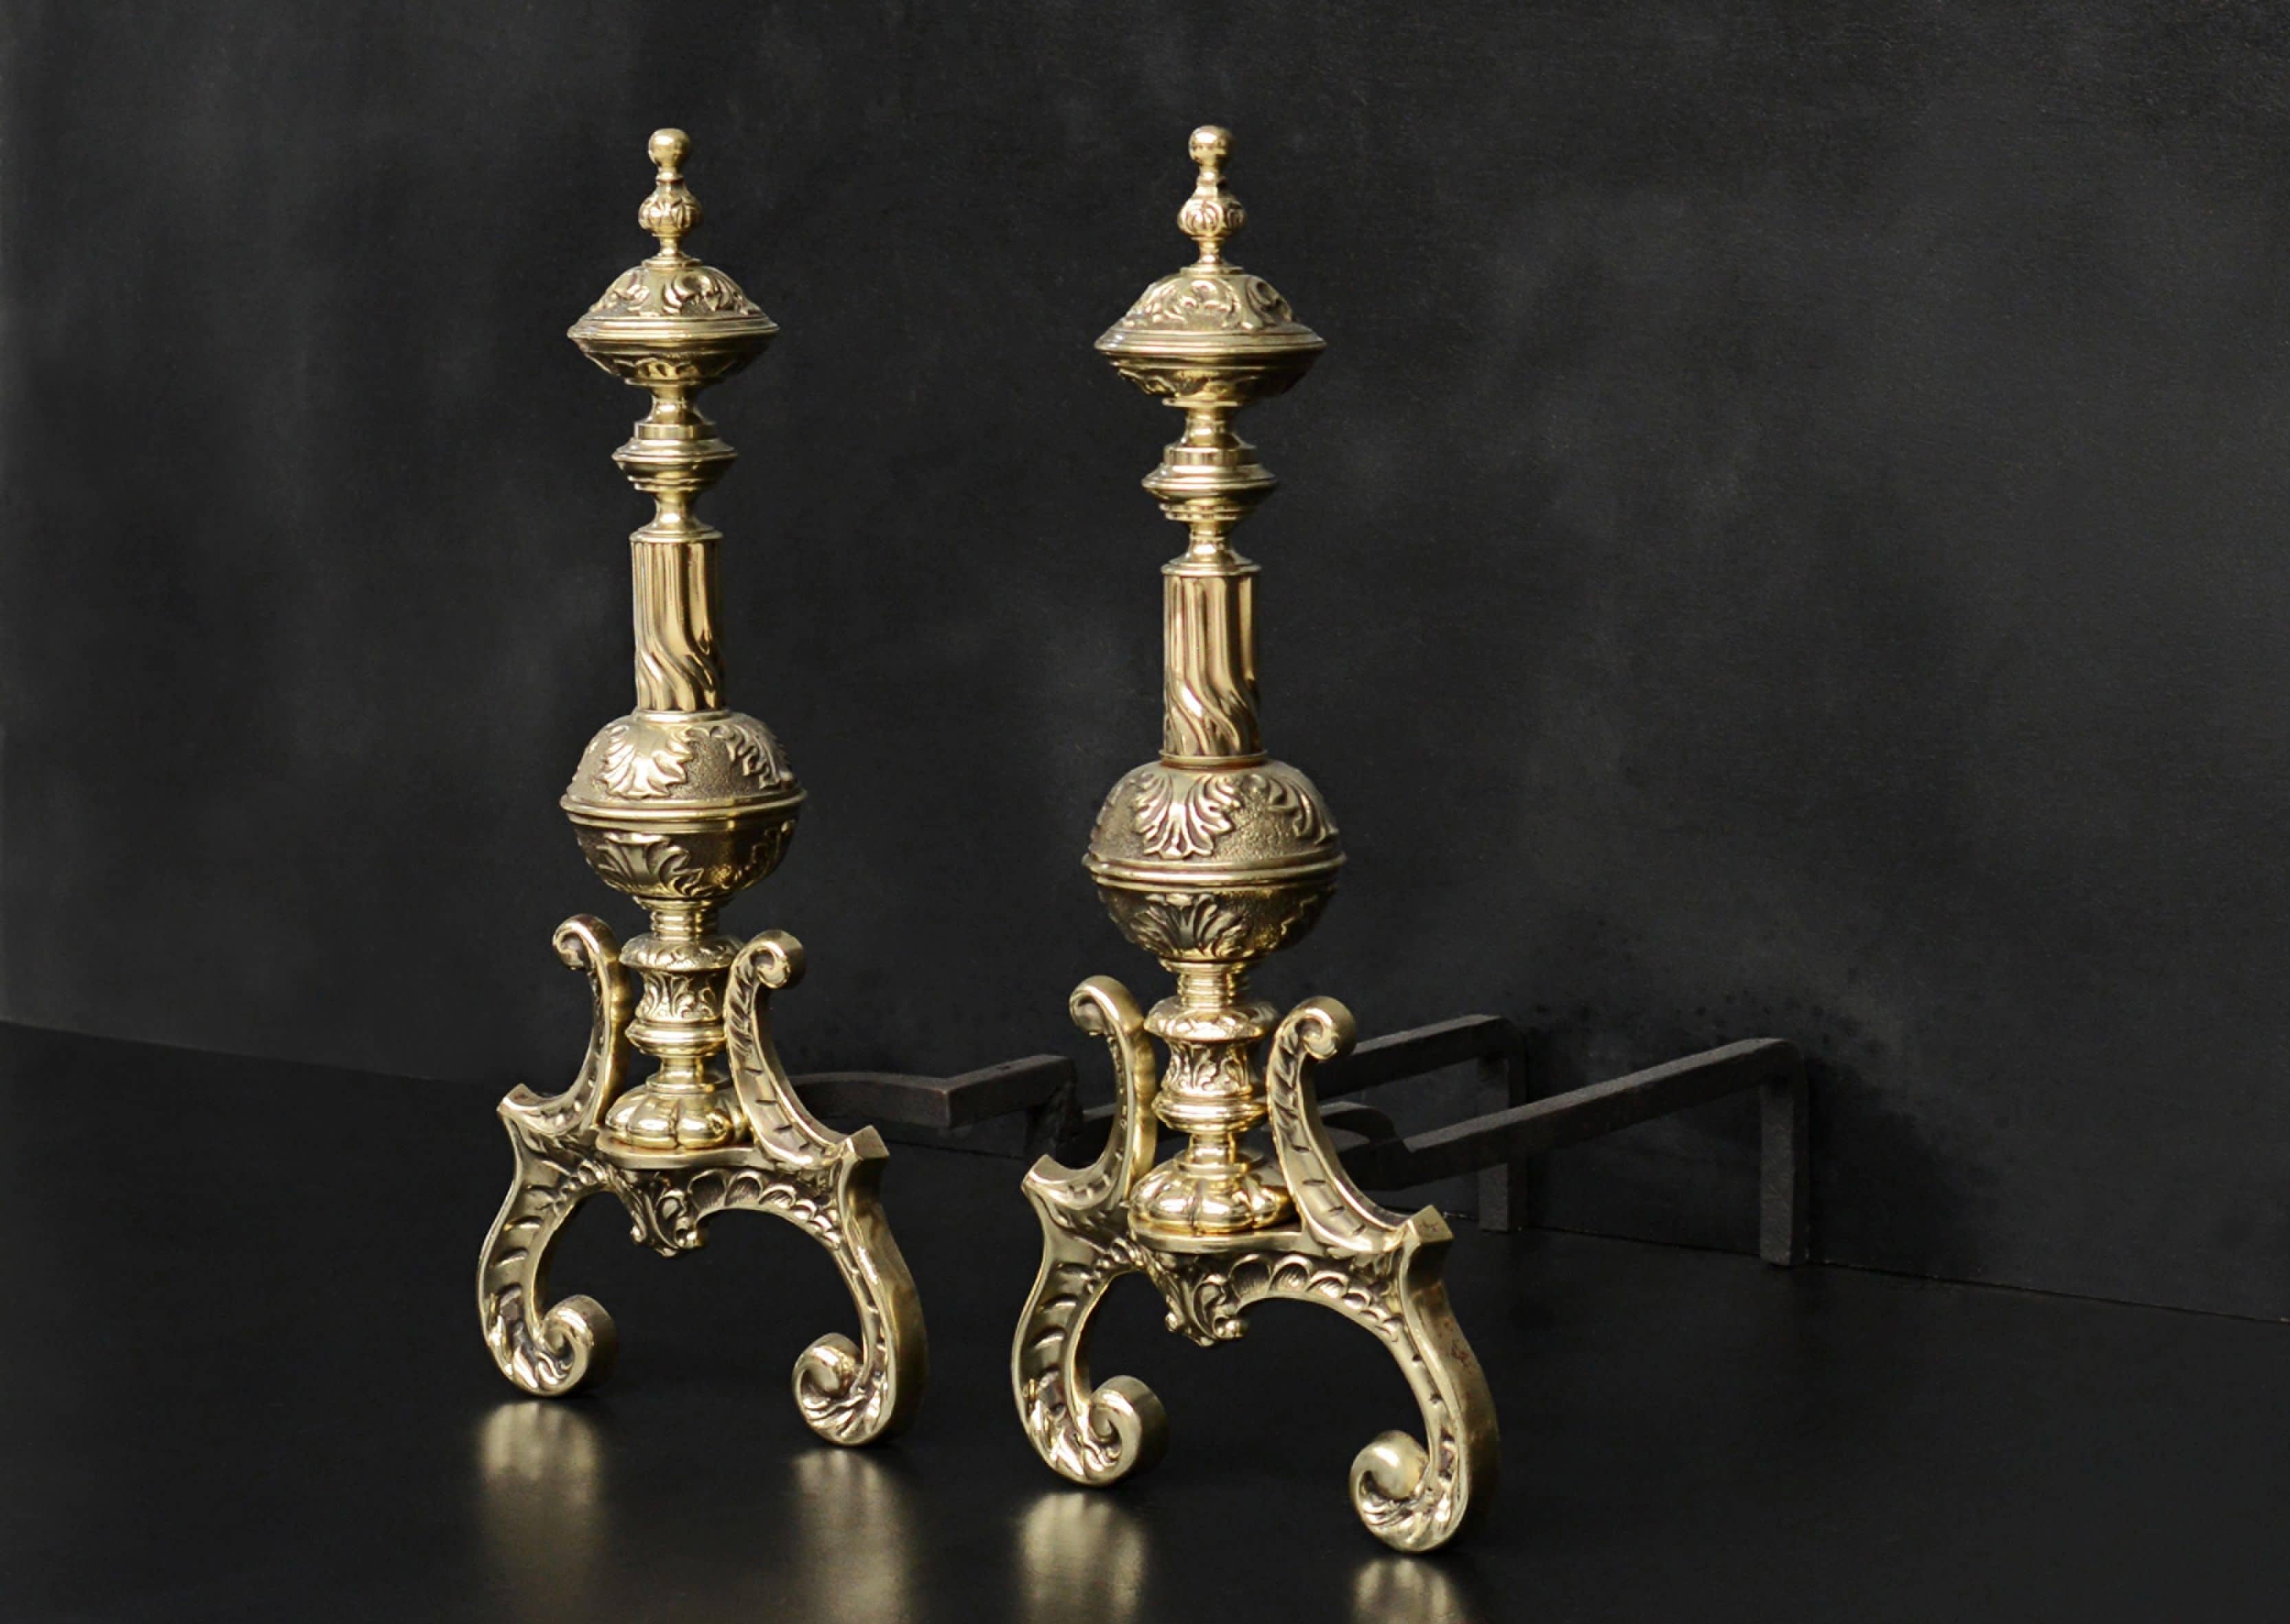 An ornate pair of brass firedogs. The arched and scrolled feet with finely cast foliage above. 19th century.

Measures: Height: 550 mm 21 ?